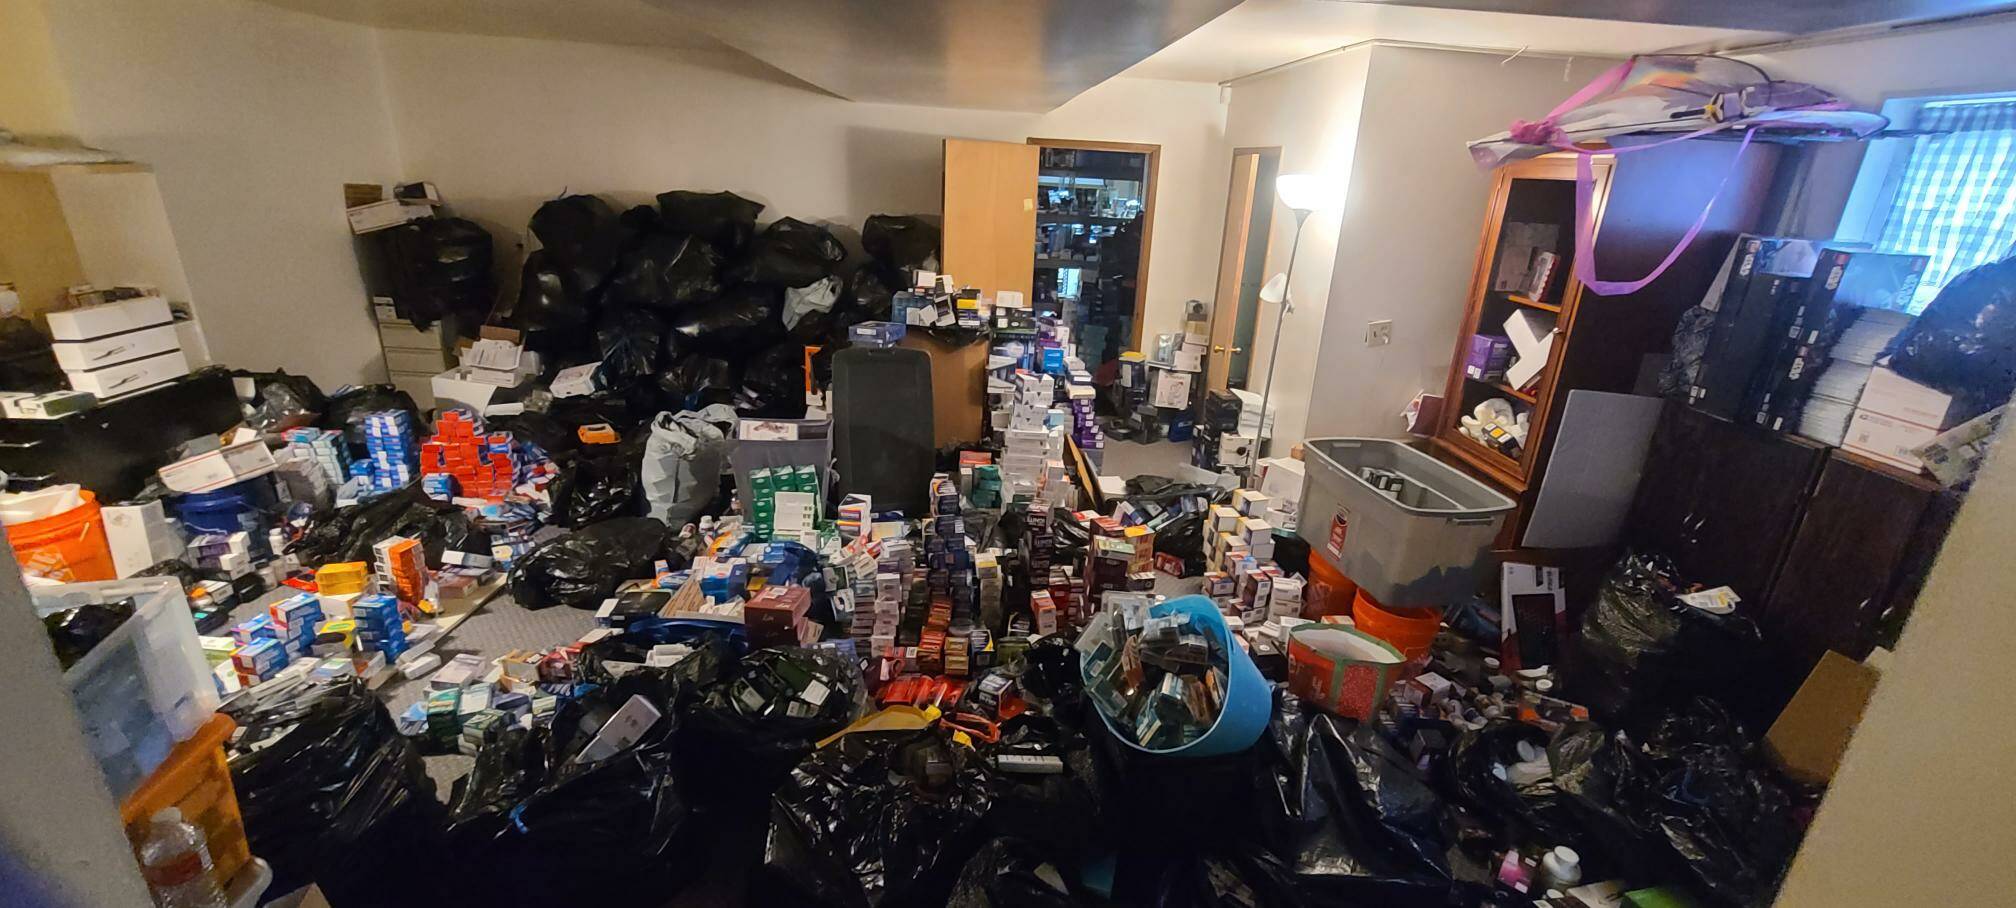 Courtesy of the Renton Police Department
Stolen merchandise piles high at the Federal Way residence of a man suspected of trafficking in stolen merchandise.